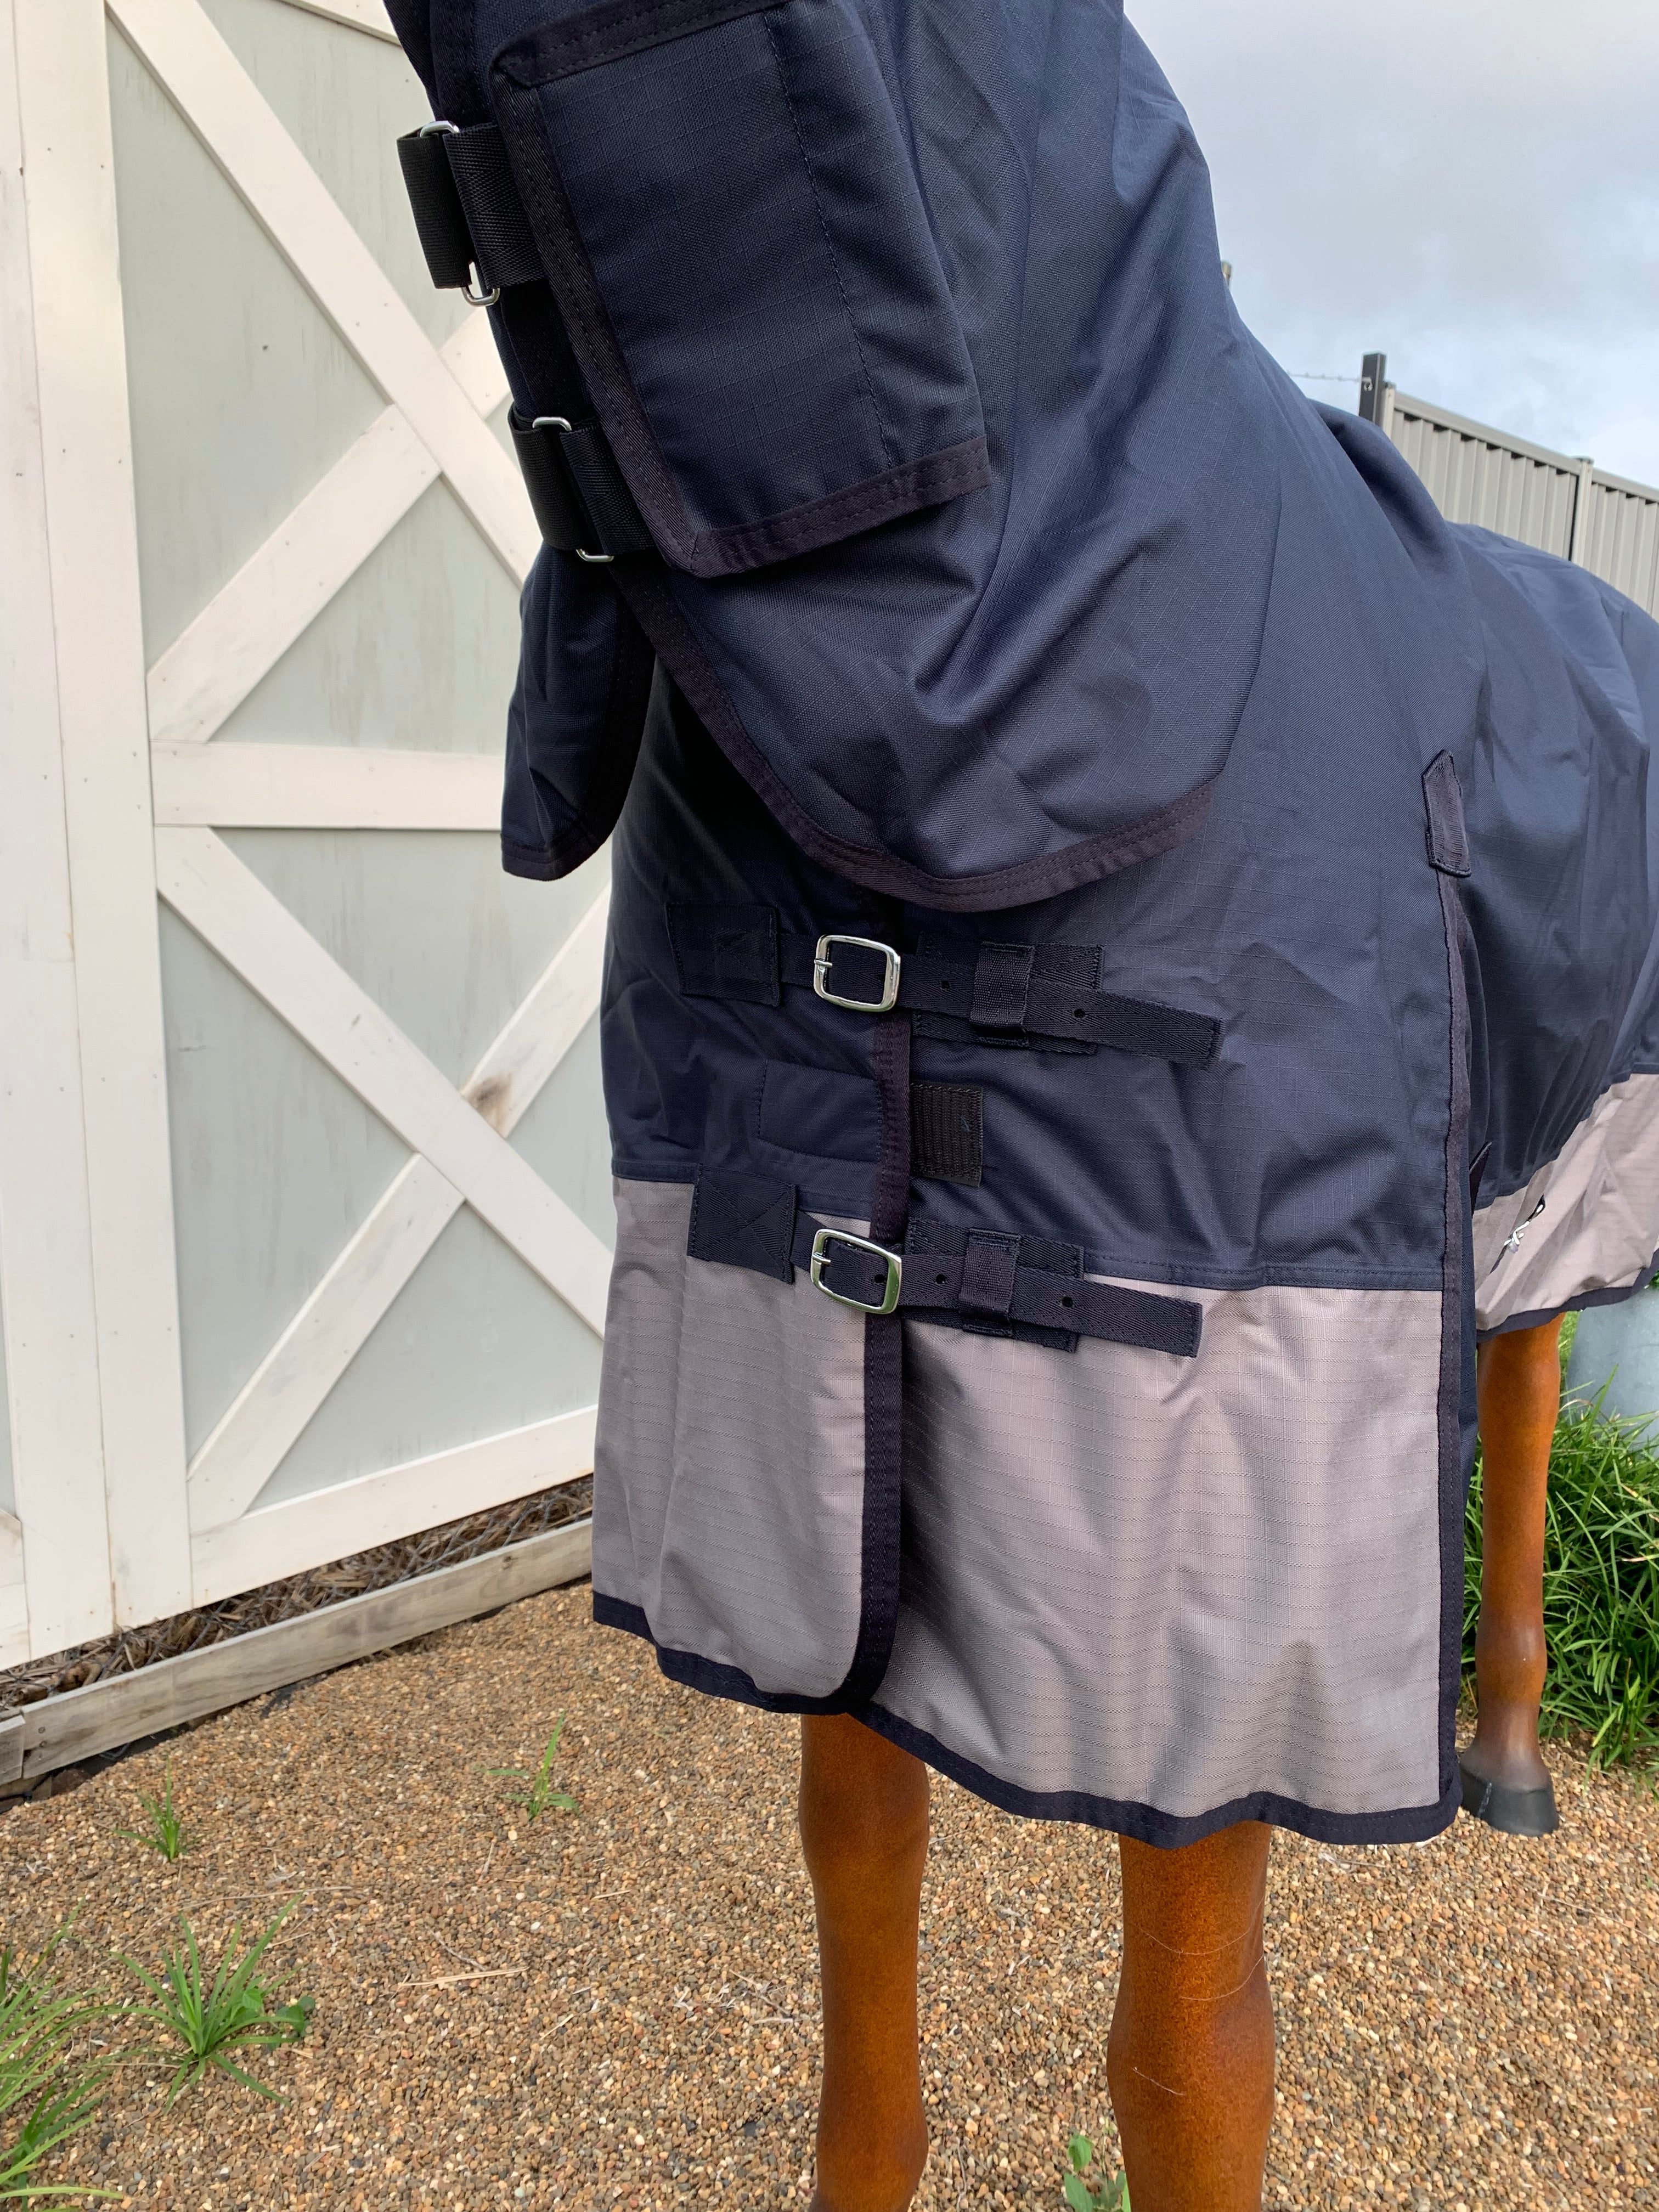 600D Turnout Fleece Lined - Navy with Grey Neck Combo